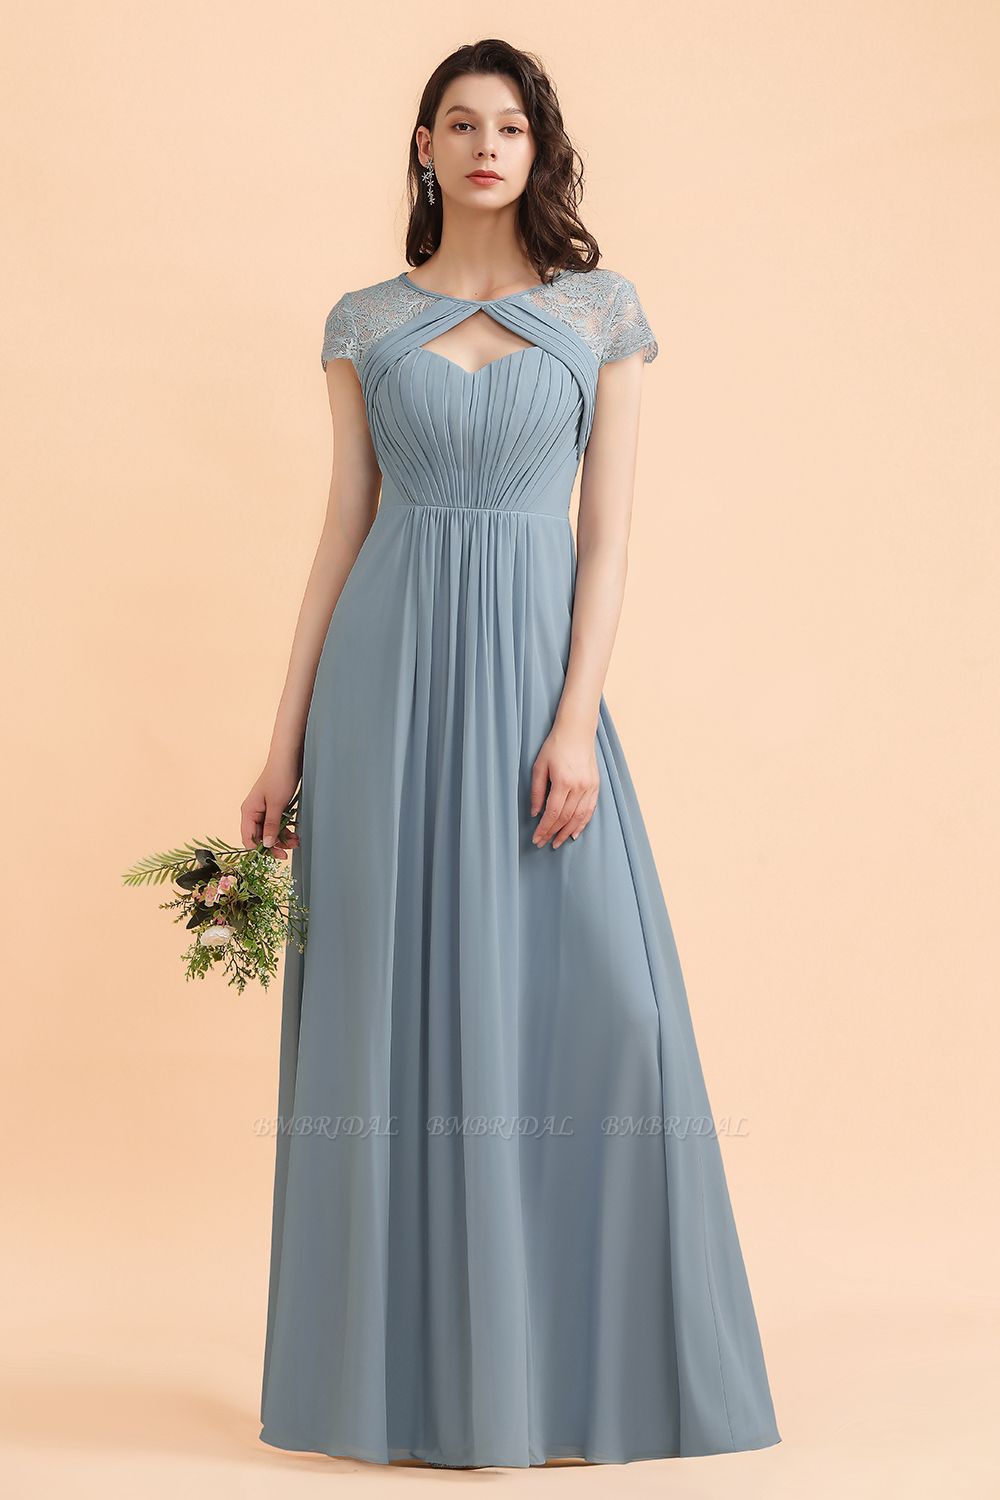 BMbridal Chic Short Sleeves Lace Chiffon Bridesmaid Dress with Ruffles Online